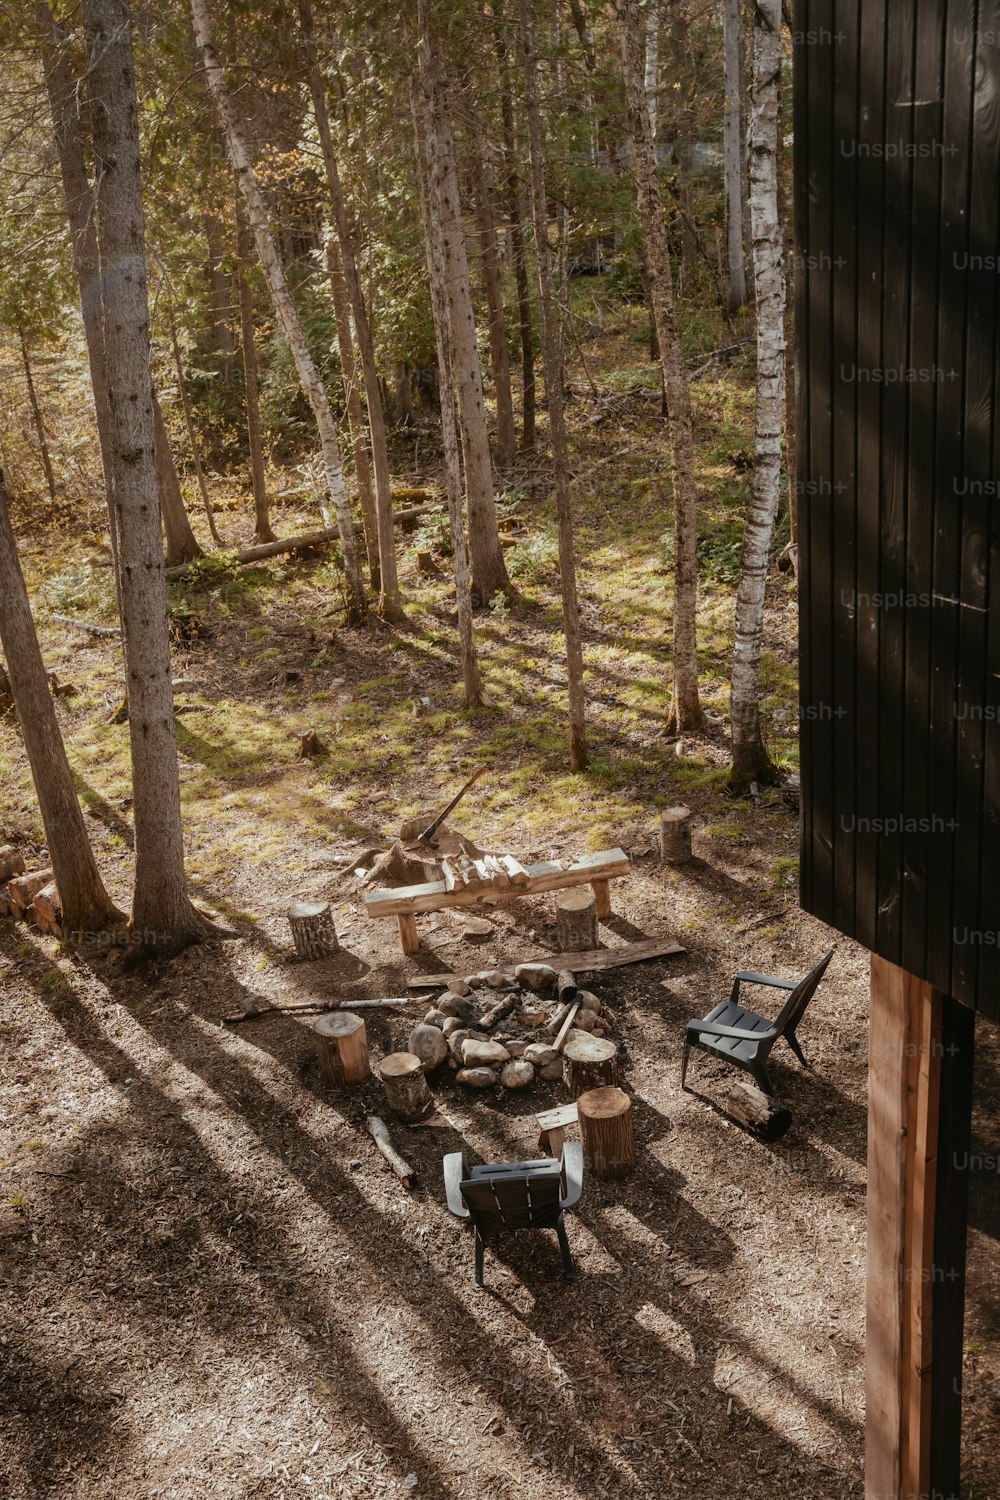 a group of chairs sitting around a fire pit in the woods